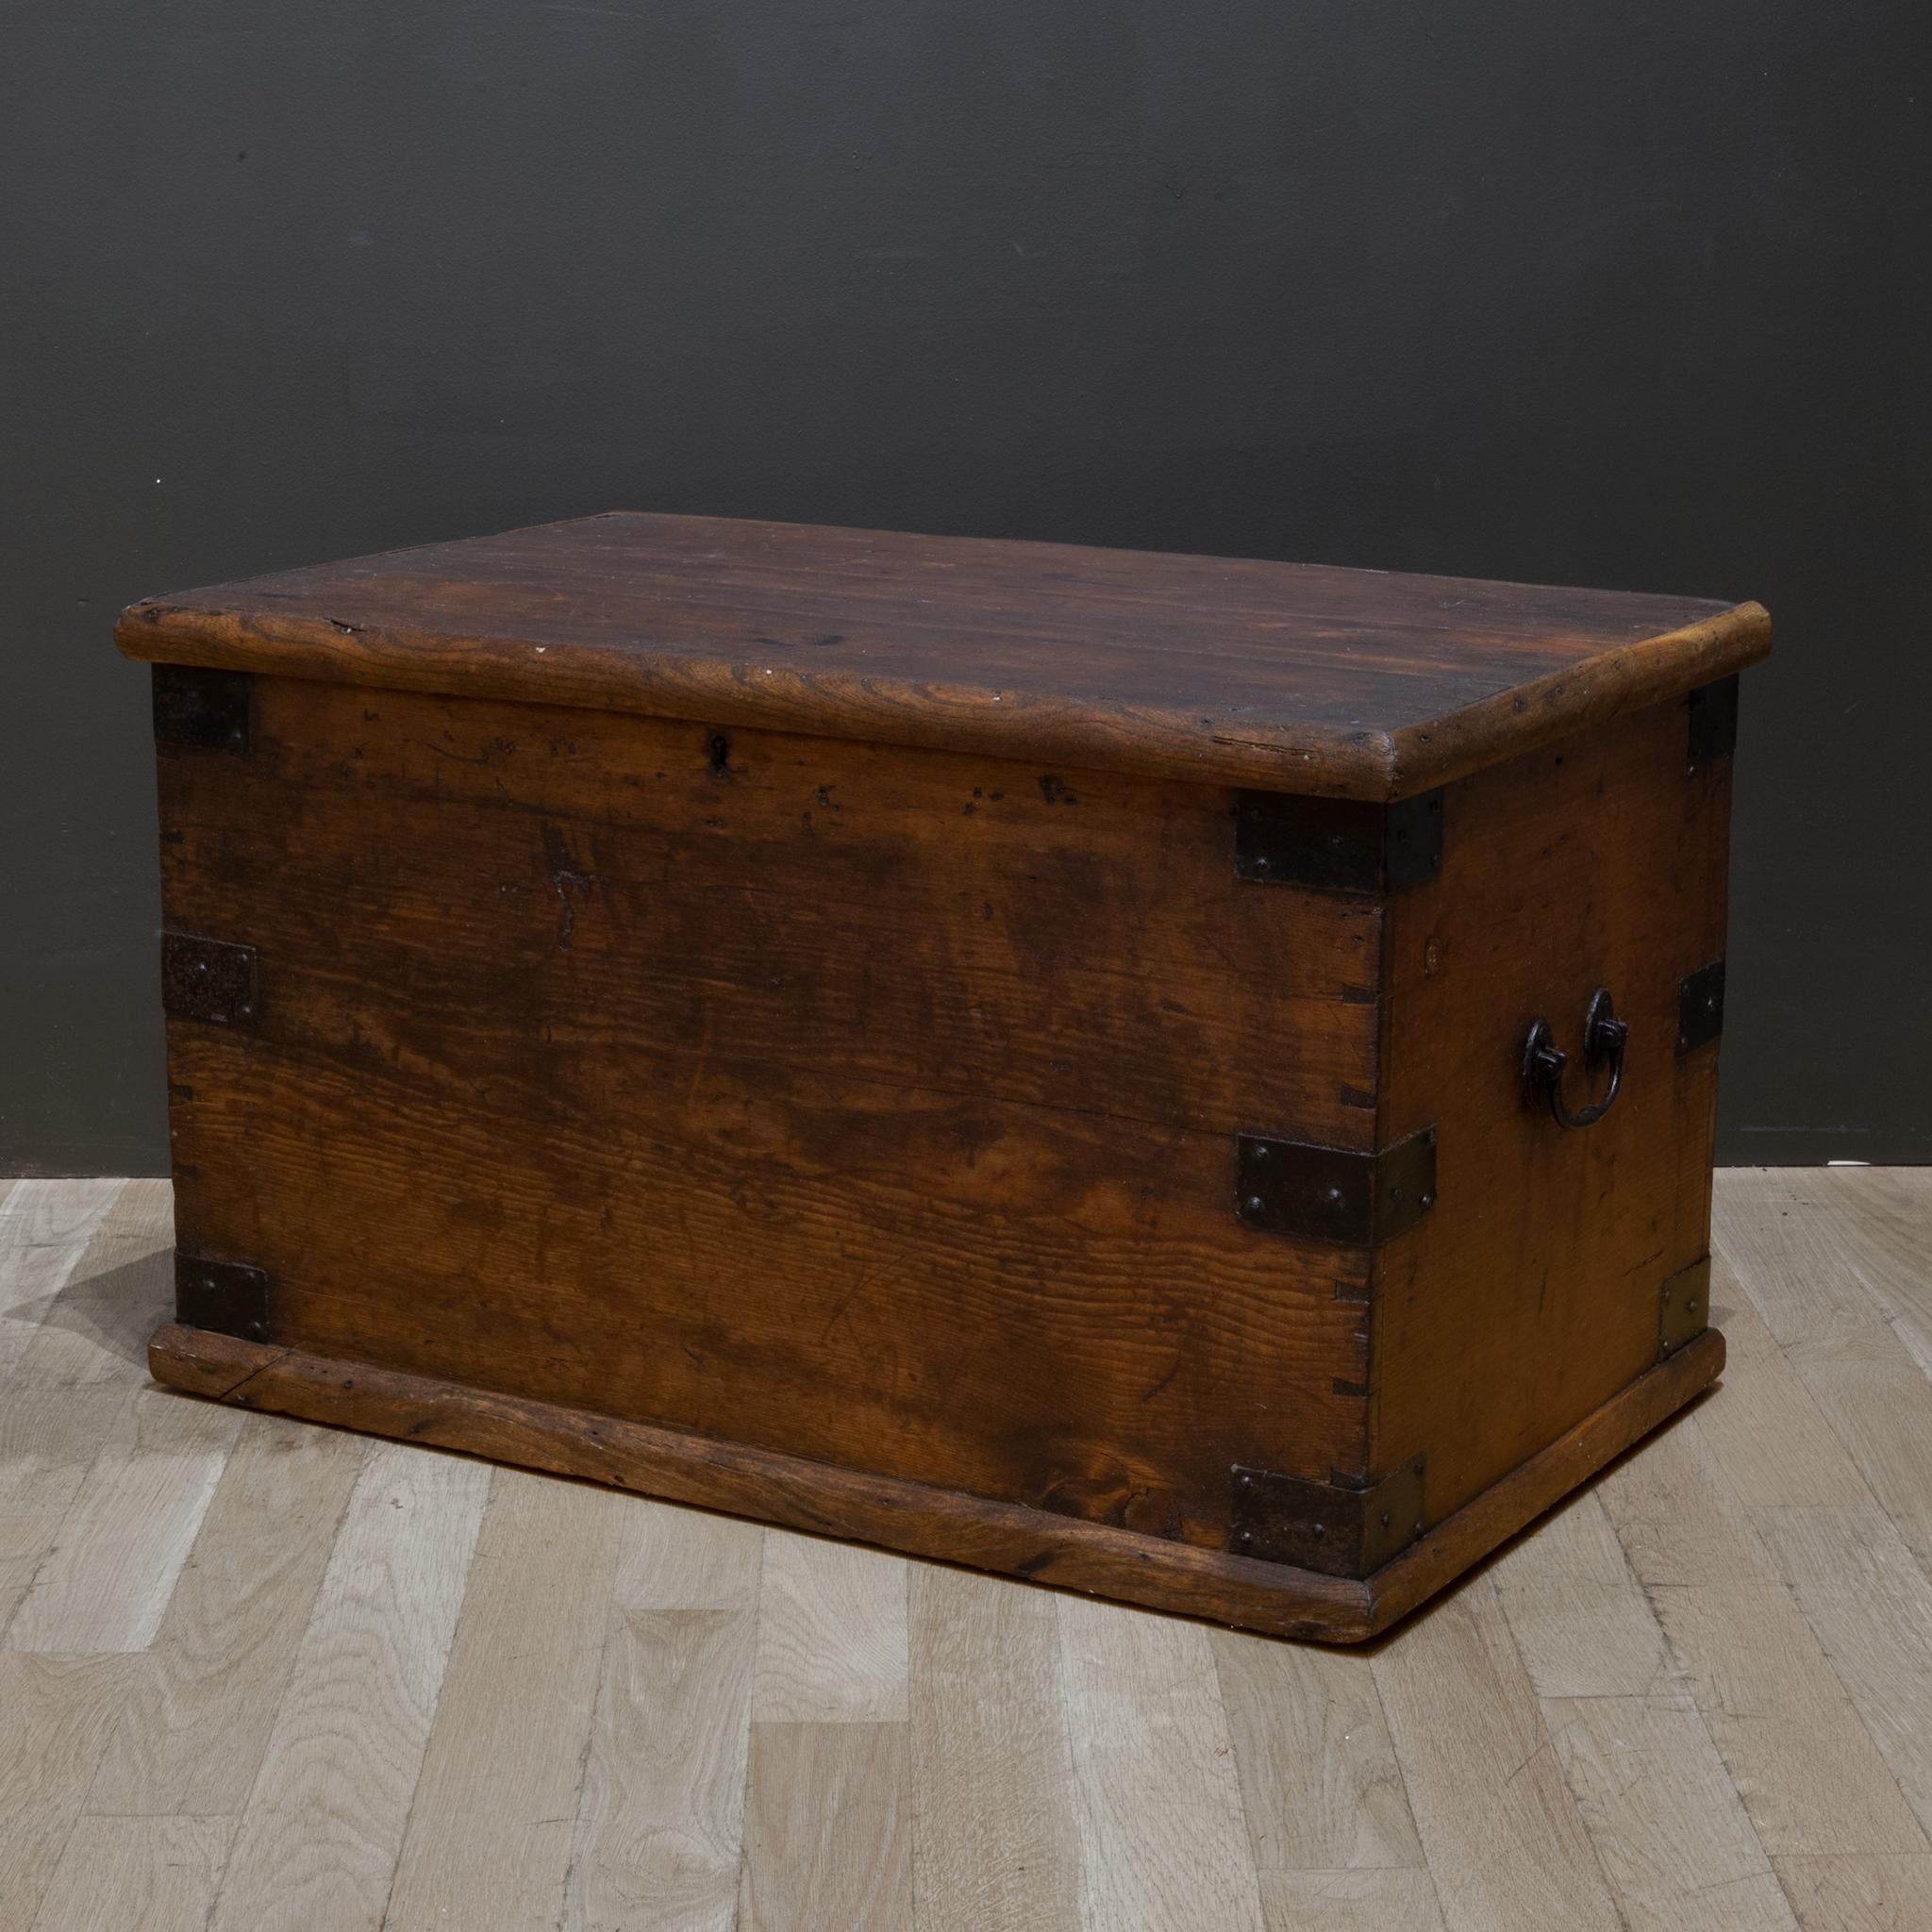 Late Victorian Late 19th / Early 20th C. Blanket Chest, c.1880-1920